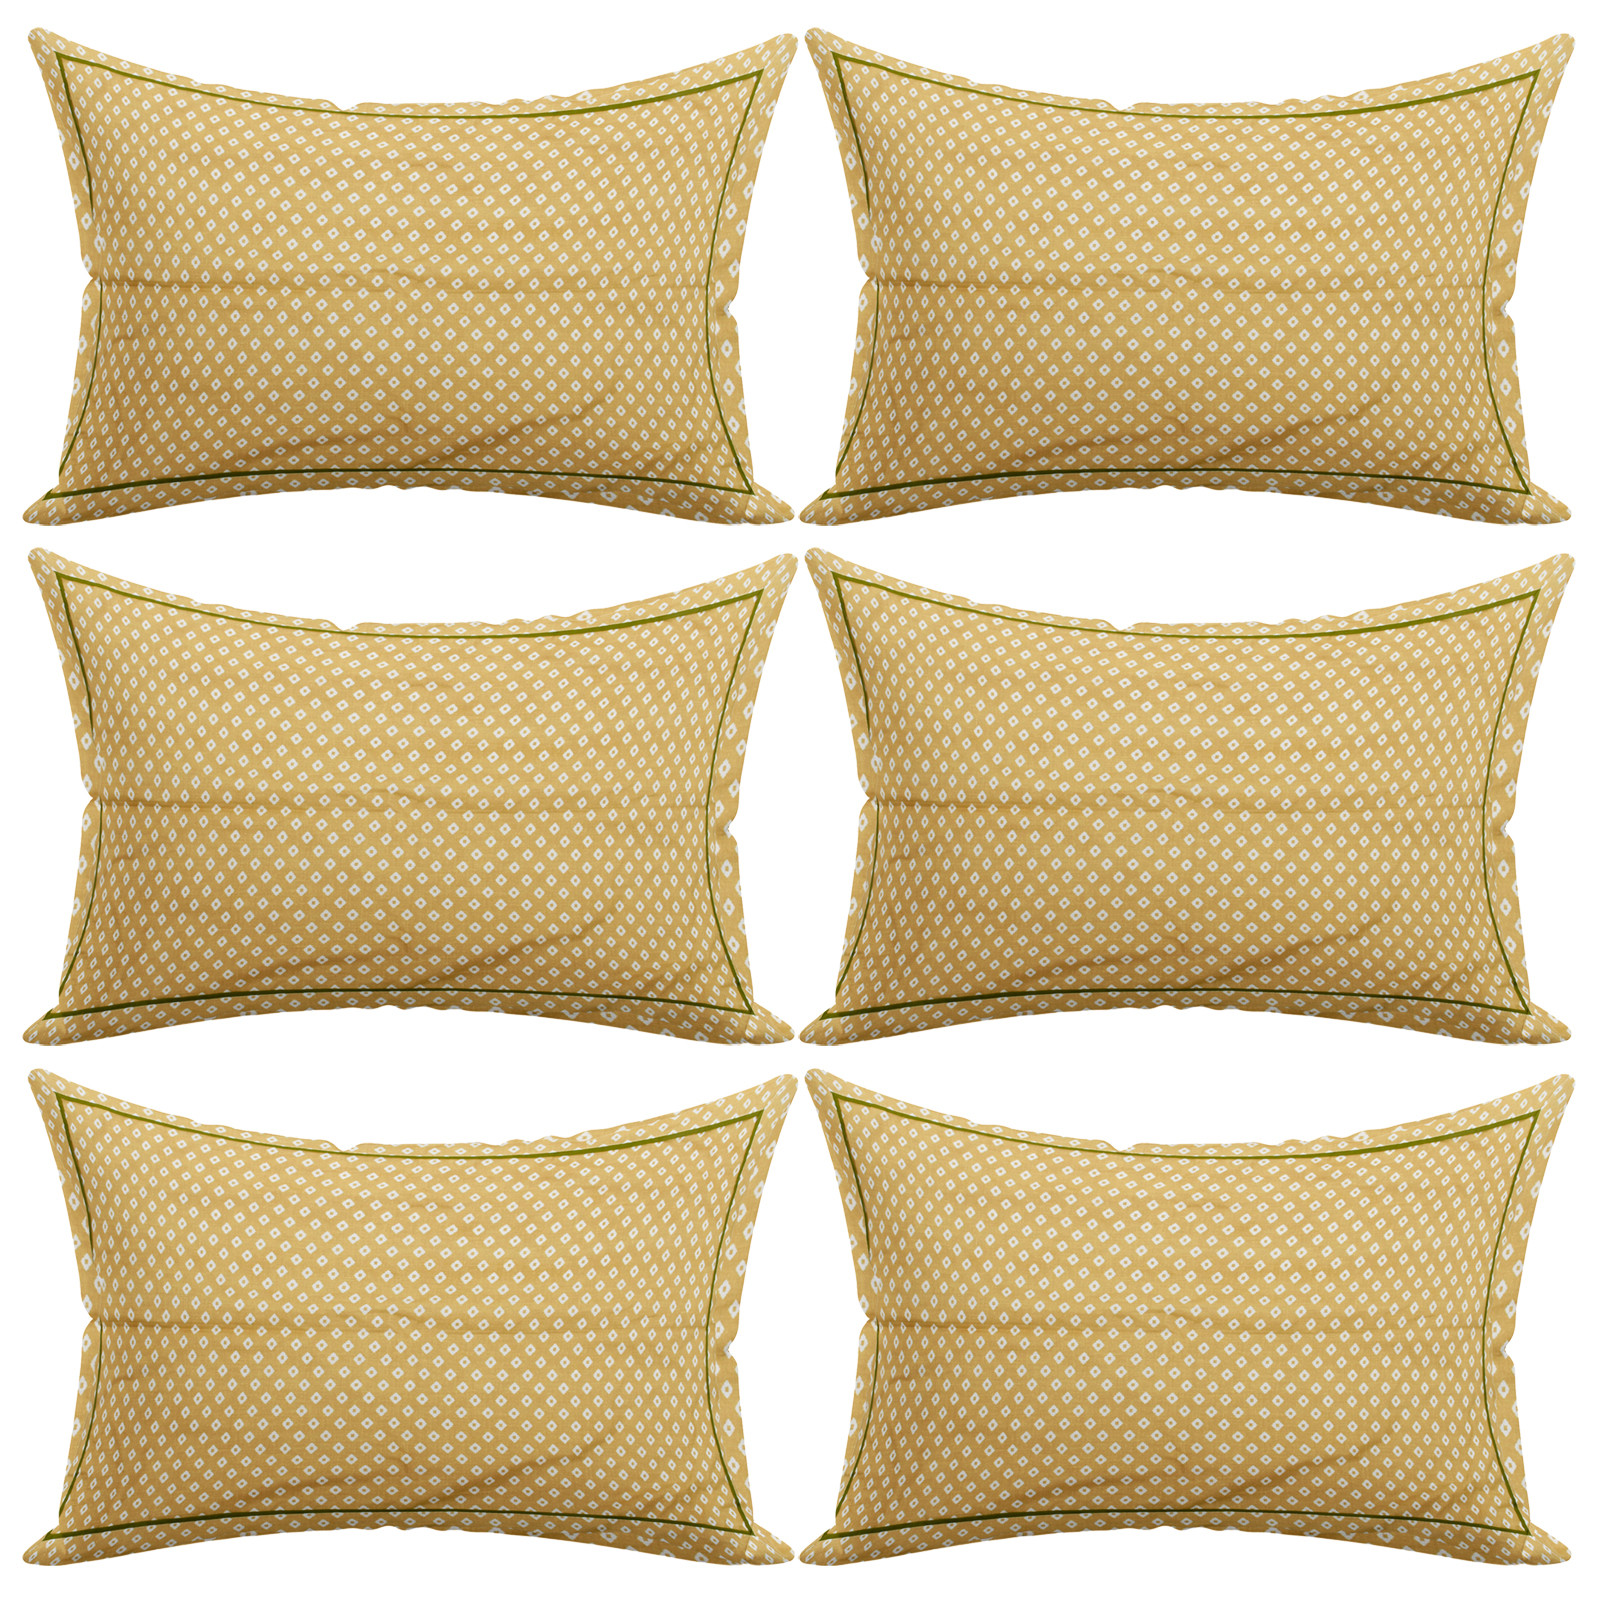 Kuber Industries Rhombus Design Cotton Pillow Covers, 18 x 28 inch,(Green)